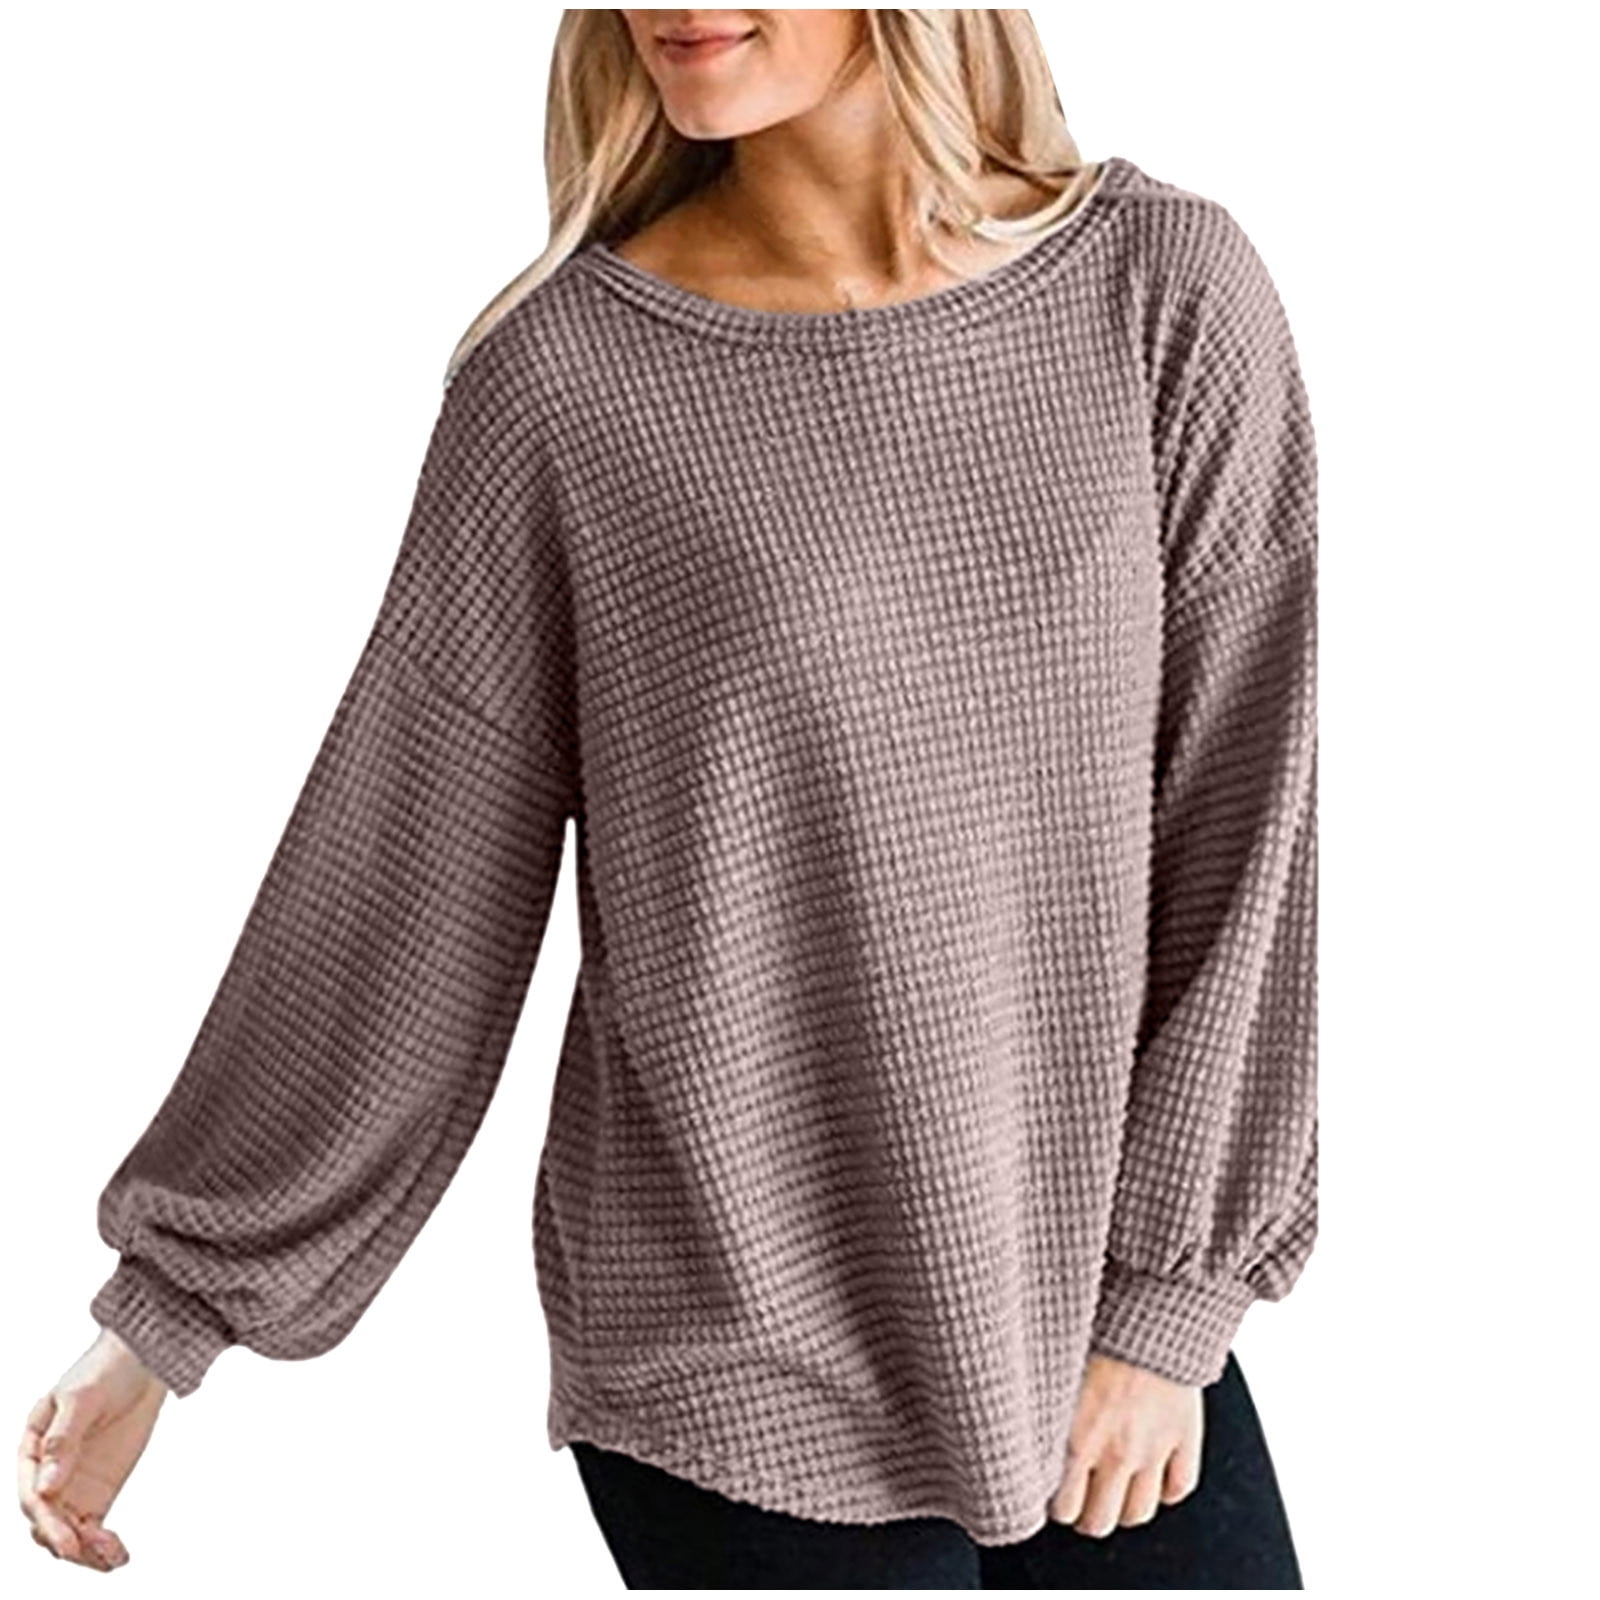 RQYYD Women's Long Sleeve Crew Neck Waffle Knit Blouse Shirts Casual ...